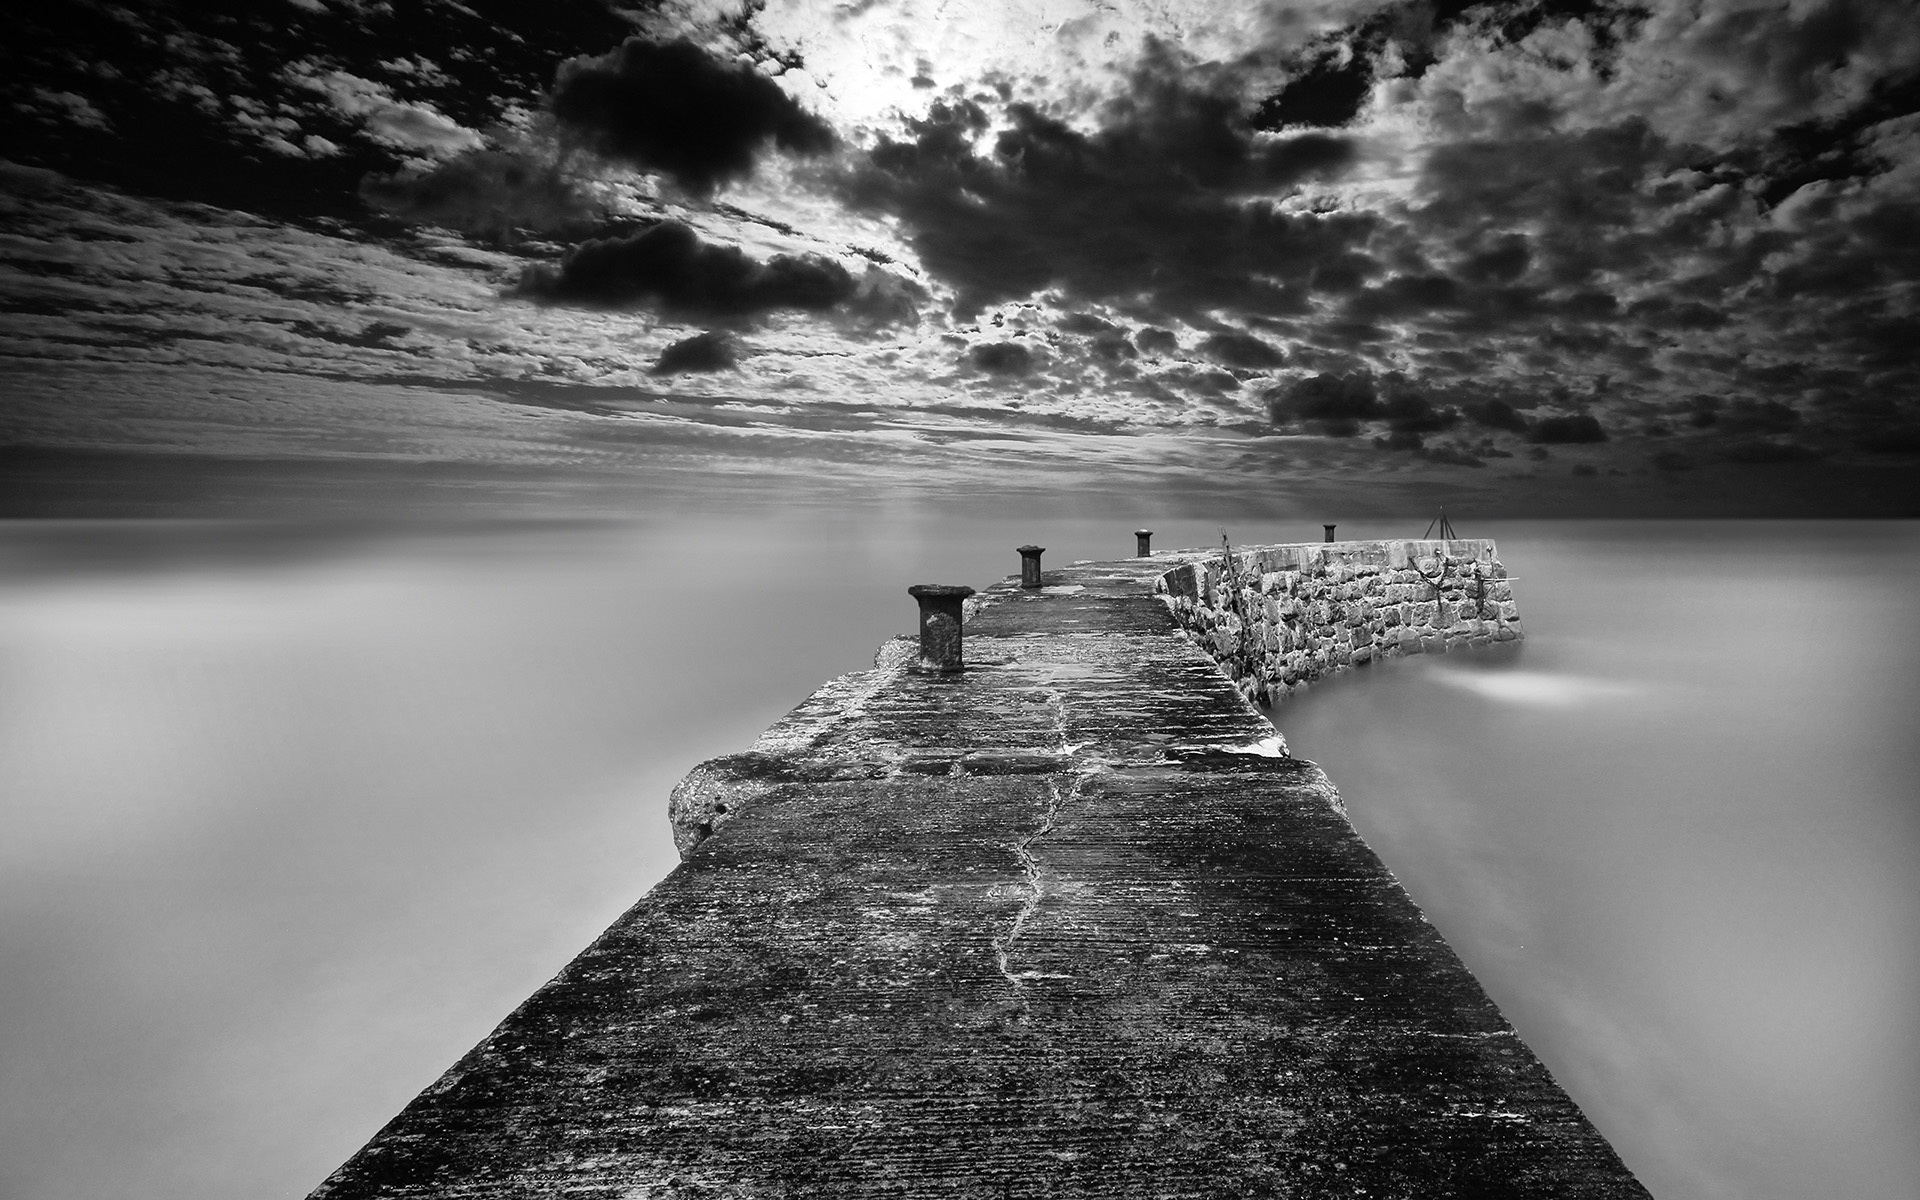 dramatic wallpaper,water,black and white,black,white,monochrome photography